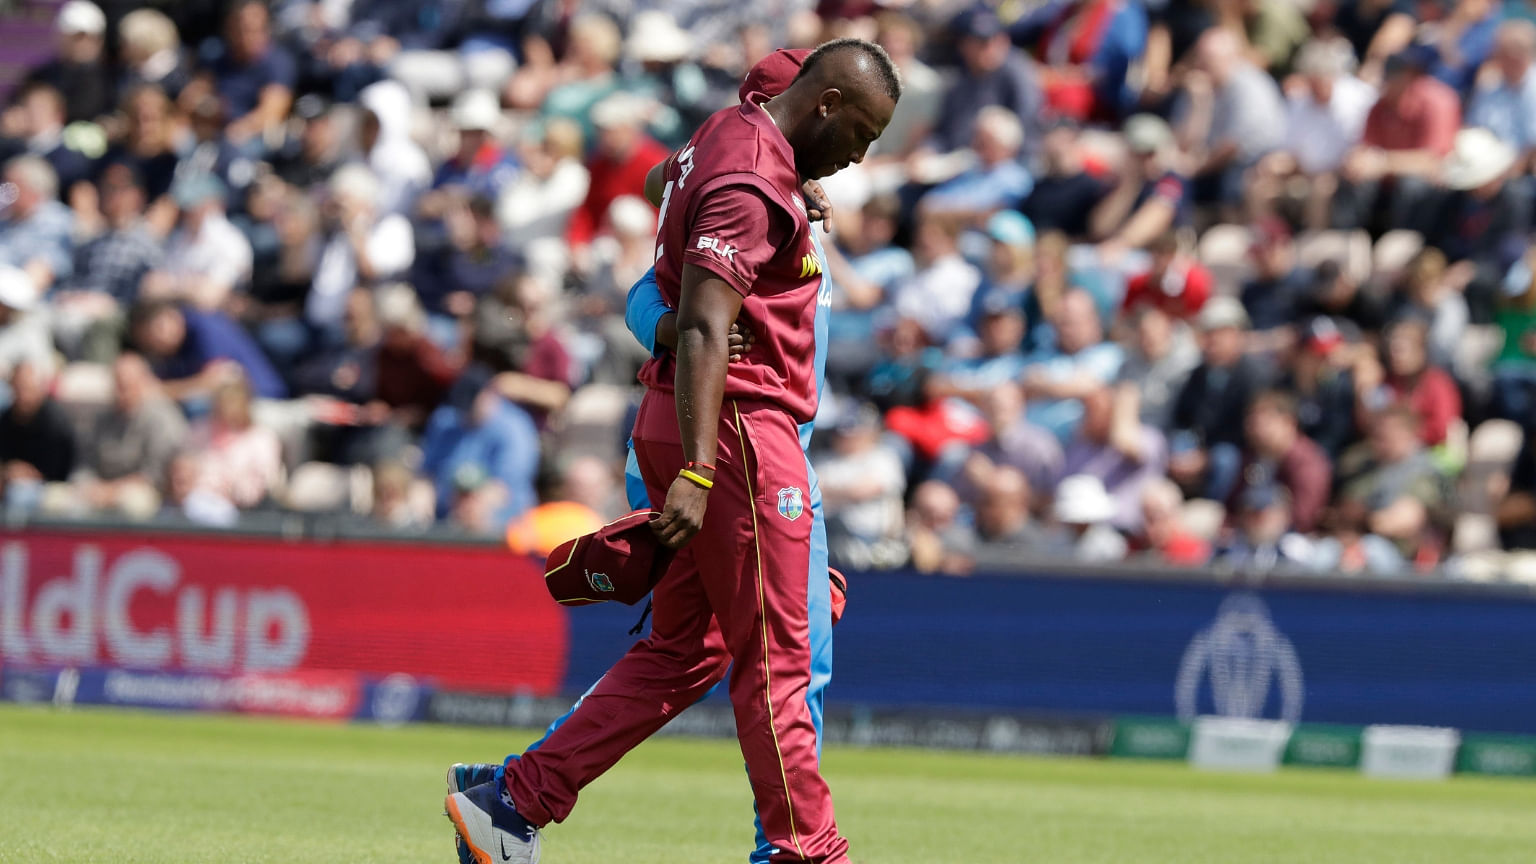 Andre Russell pulled up a knee injury during their eight-wicket defeat to England in a World Cup match on Friday ,14 June.